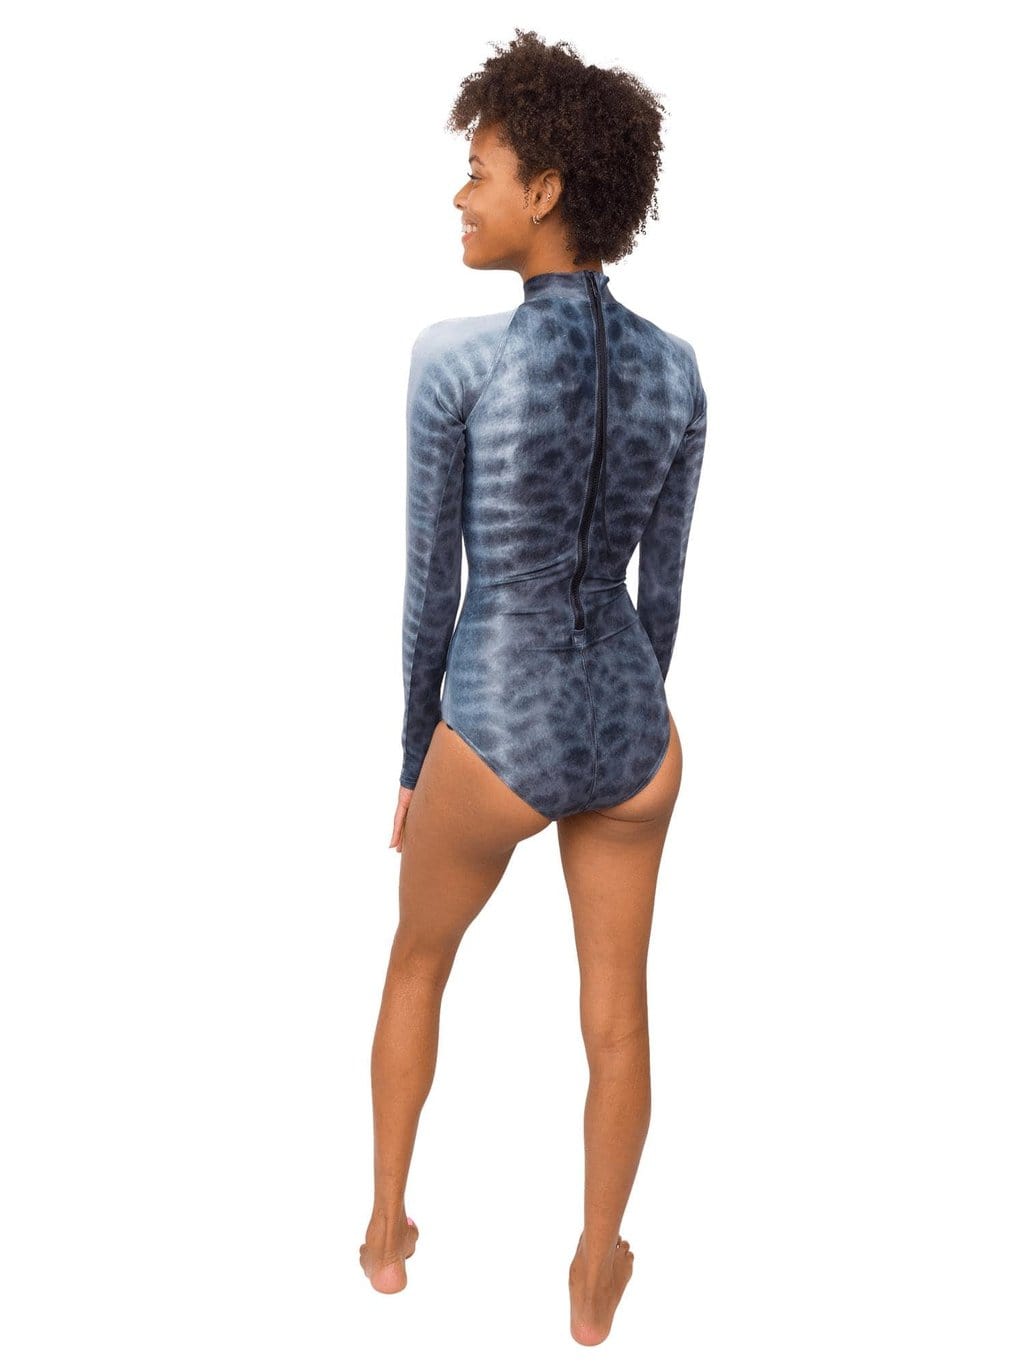 Model: Syriah is a sea turtle conservation biologist. She is 5&#39;7&quot;, 111 lbs and is wearing a size XS.